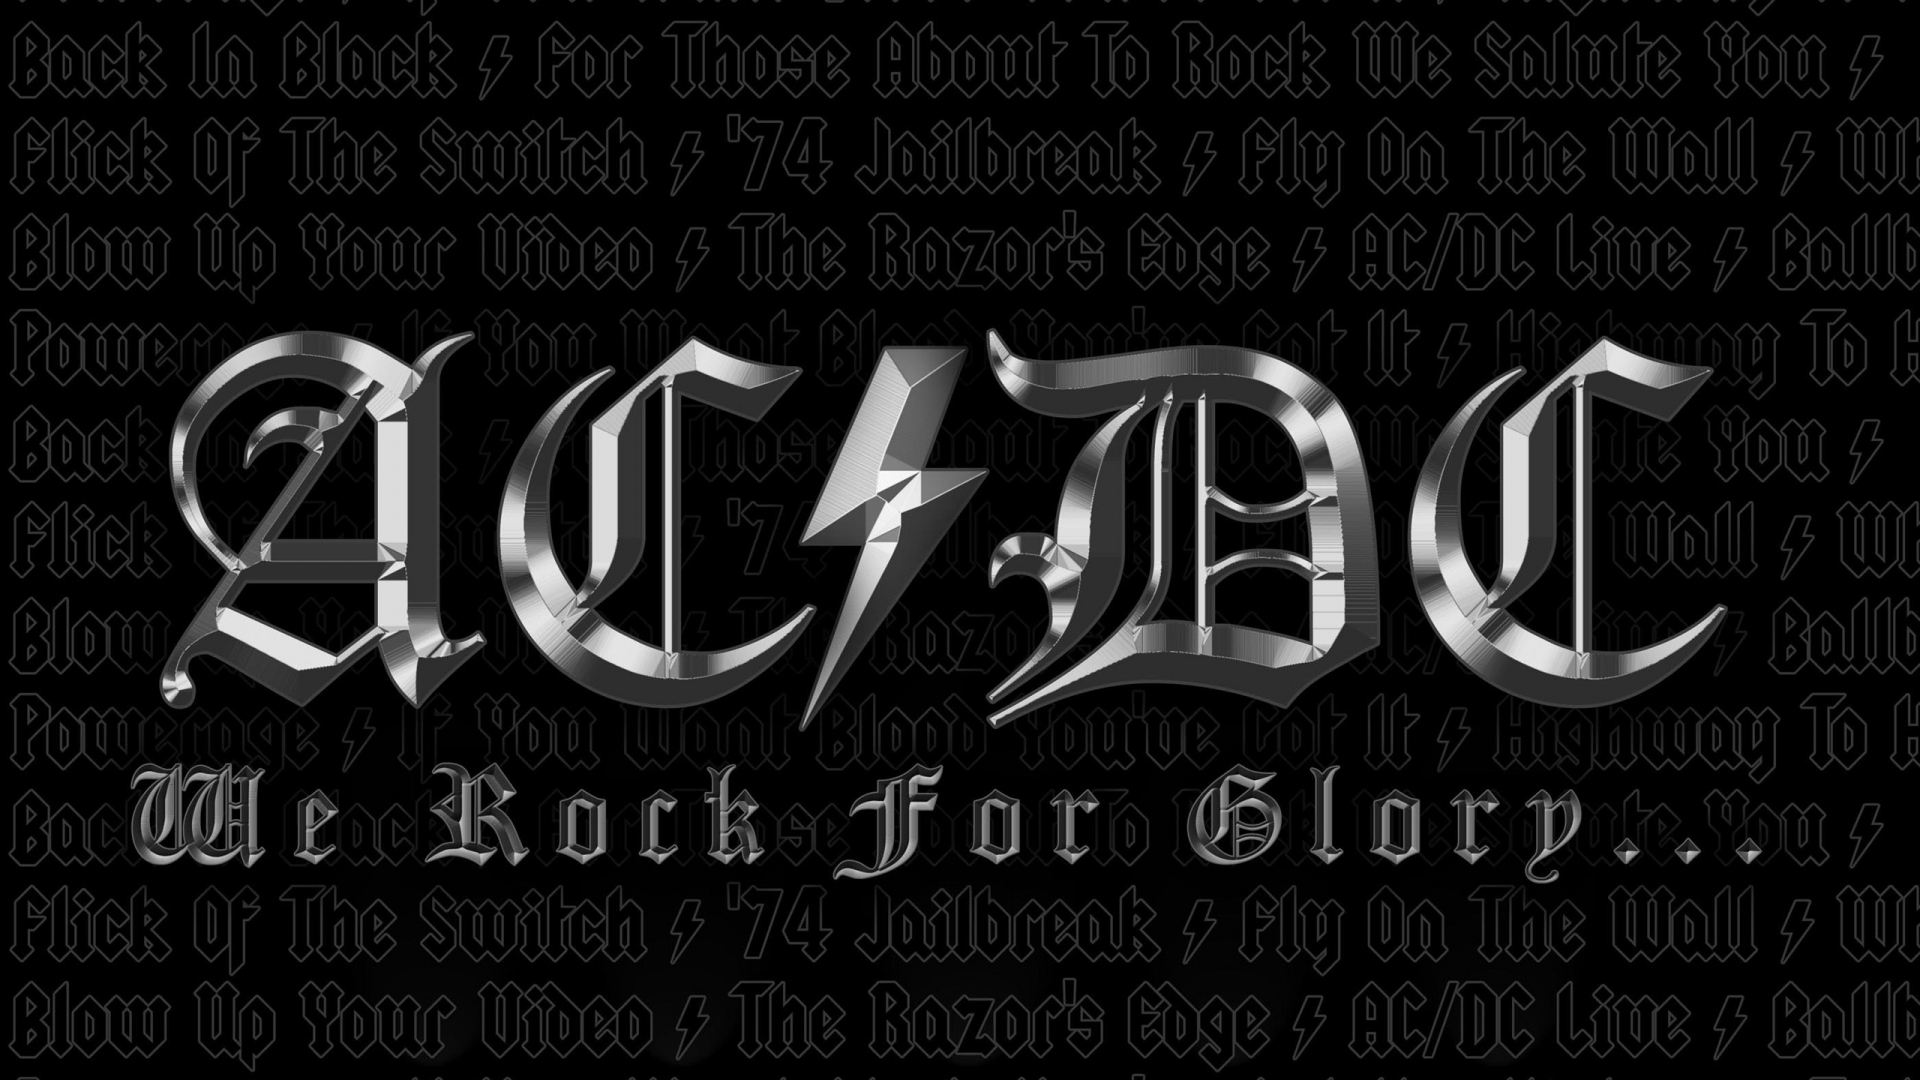 ACDC Band for 1920 x 1080 HDTV 1080p resolution